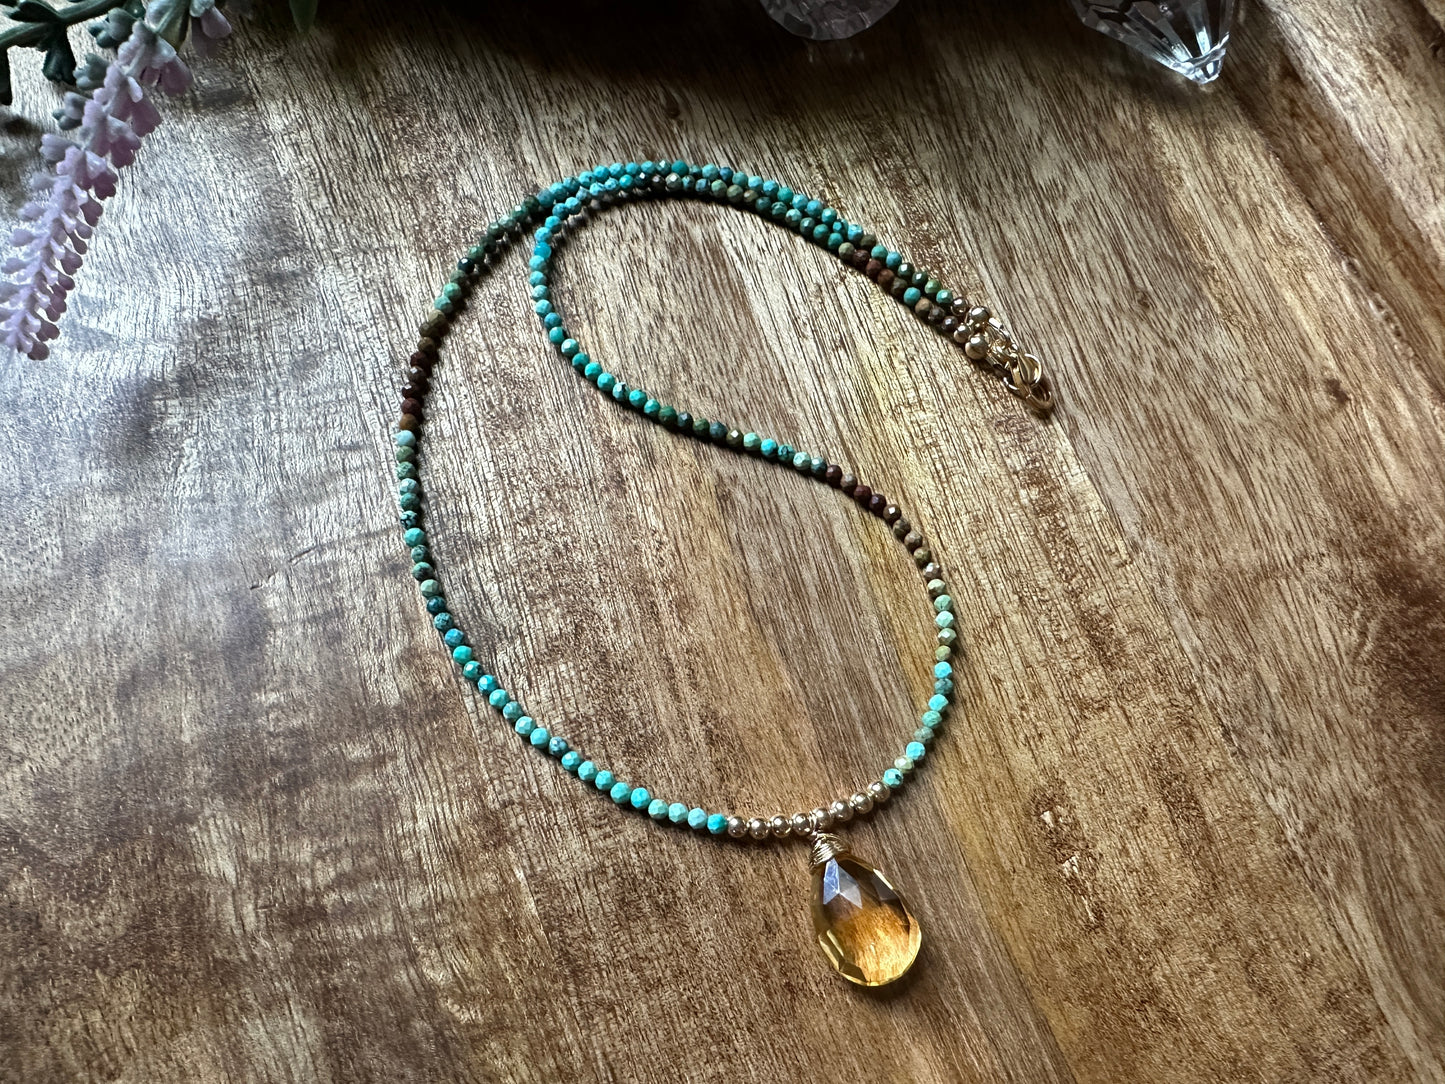 14kt Gold Filled Dainty Turquoise and Citrine Necklace